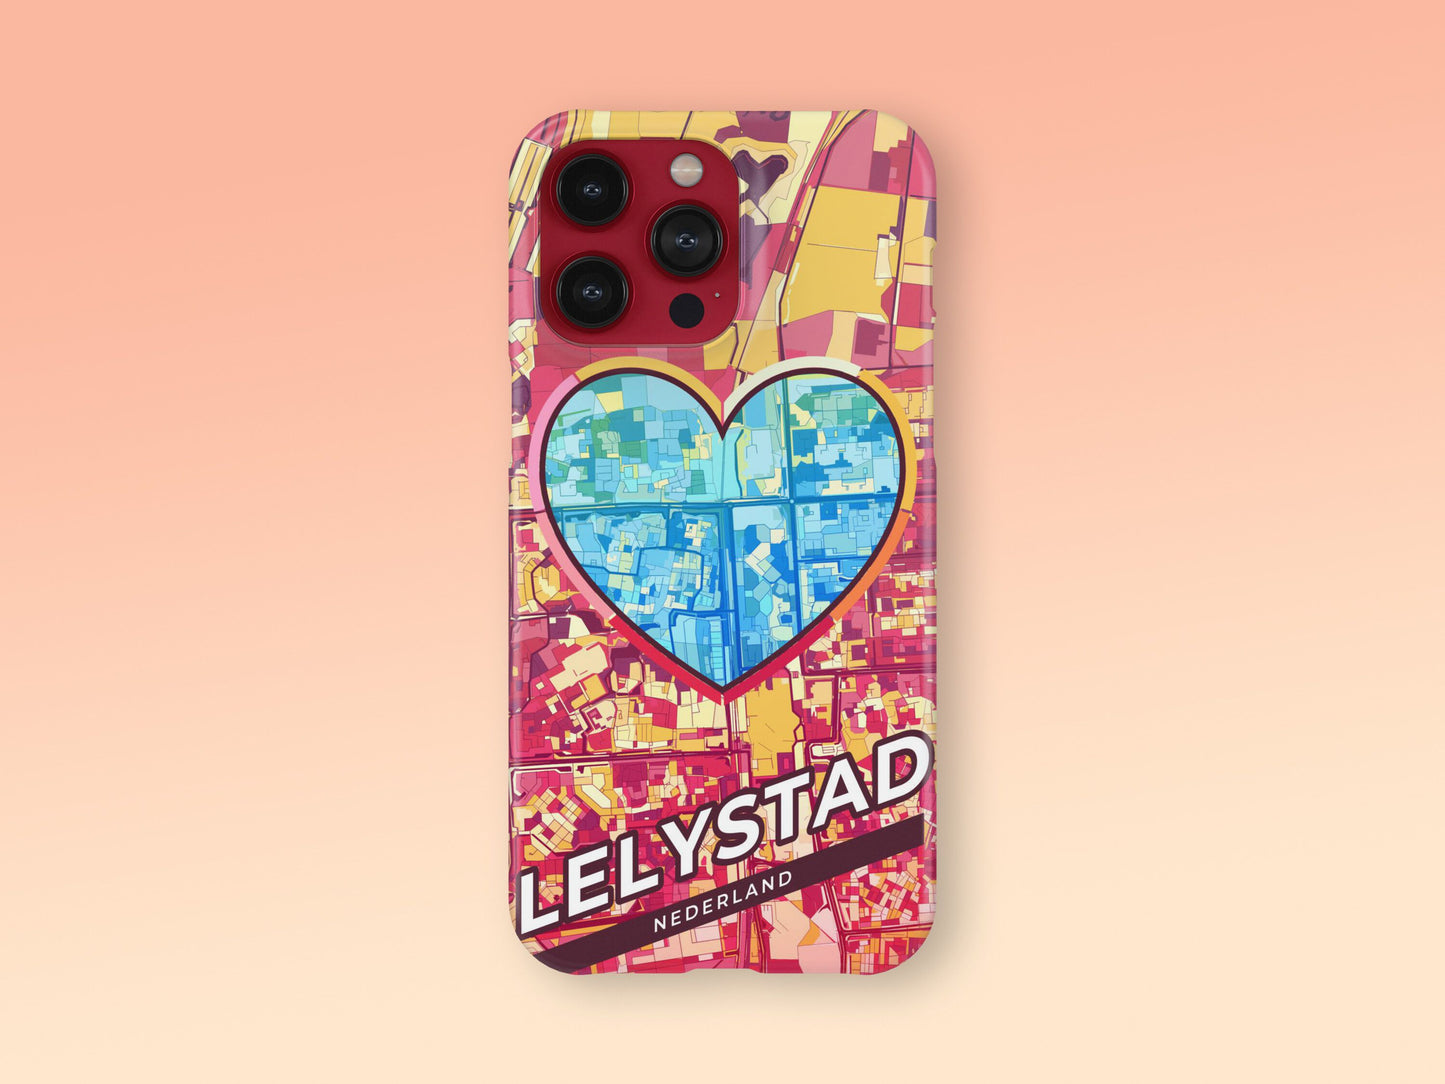 Lelystad Netherlands slim phone case with colorful icon. Birthday, wedding or housewarming gift. Couple match cases. 2